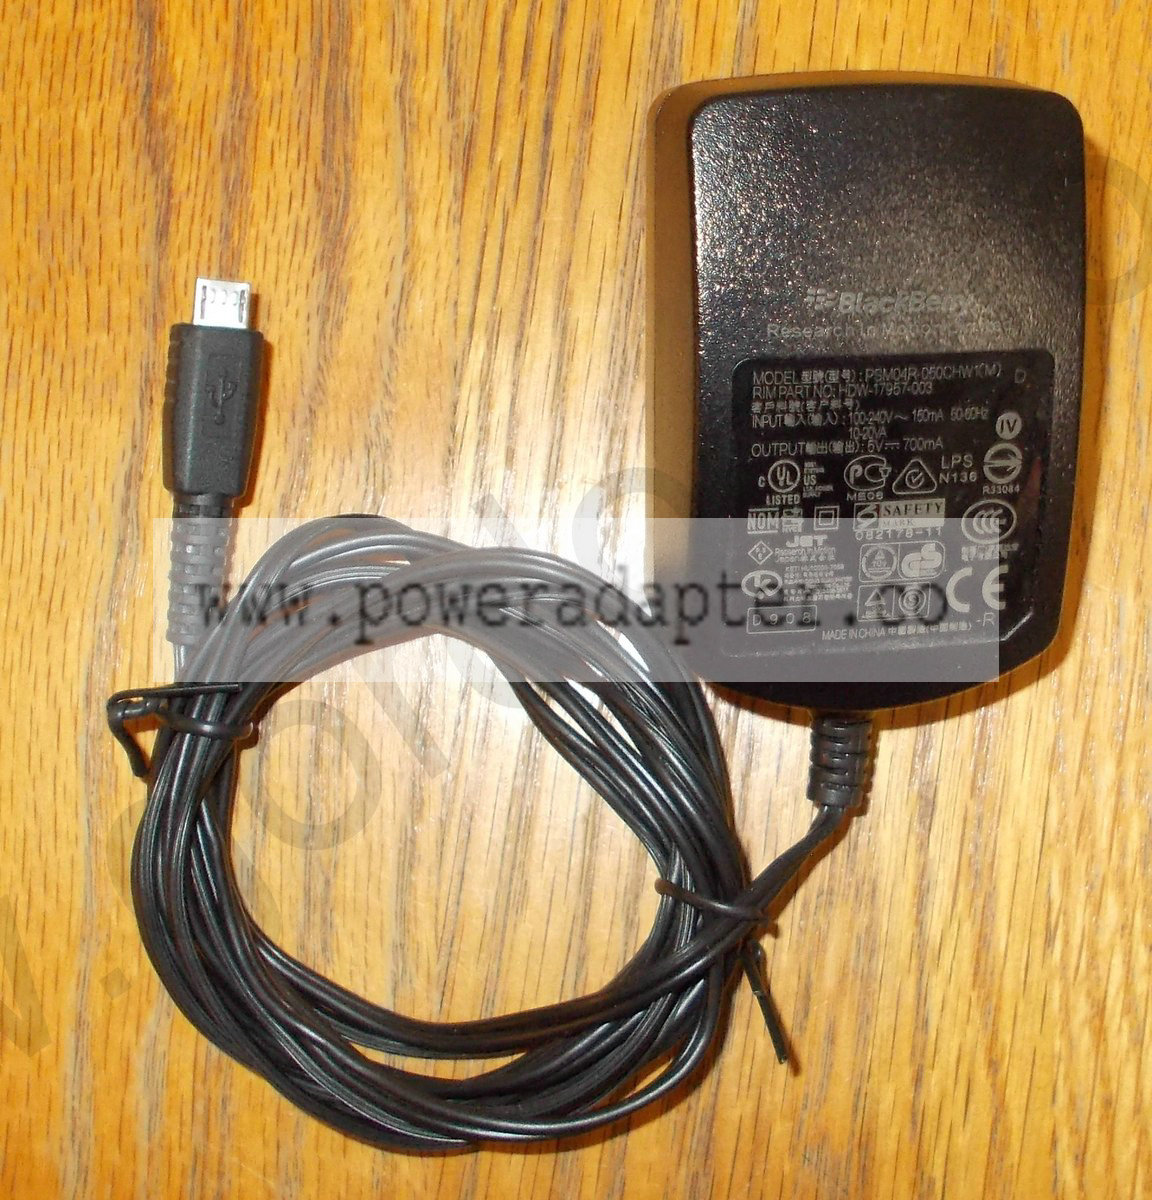 Blackberry PSM04R-050CHW1 AC Adapter Charger [PSM04R-050CH] Blackberry Model PSM04R-050CHW1 RIM Research In Motion Par